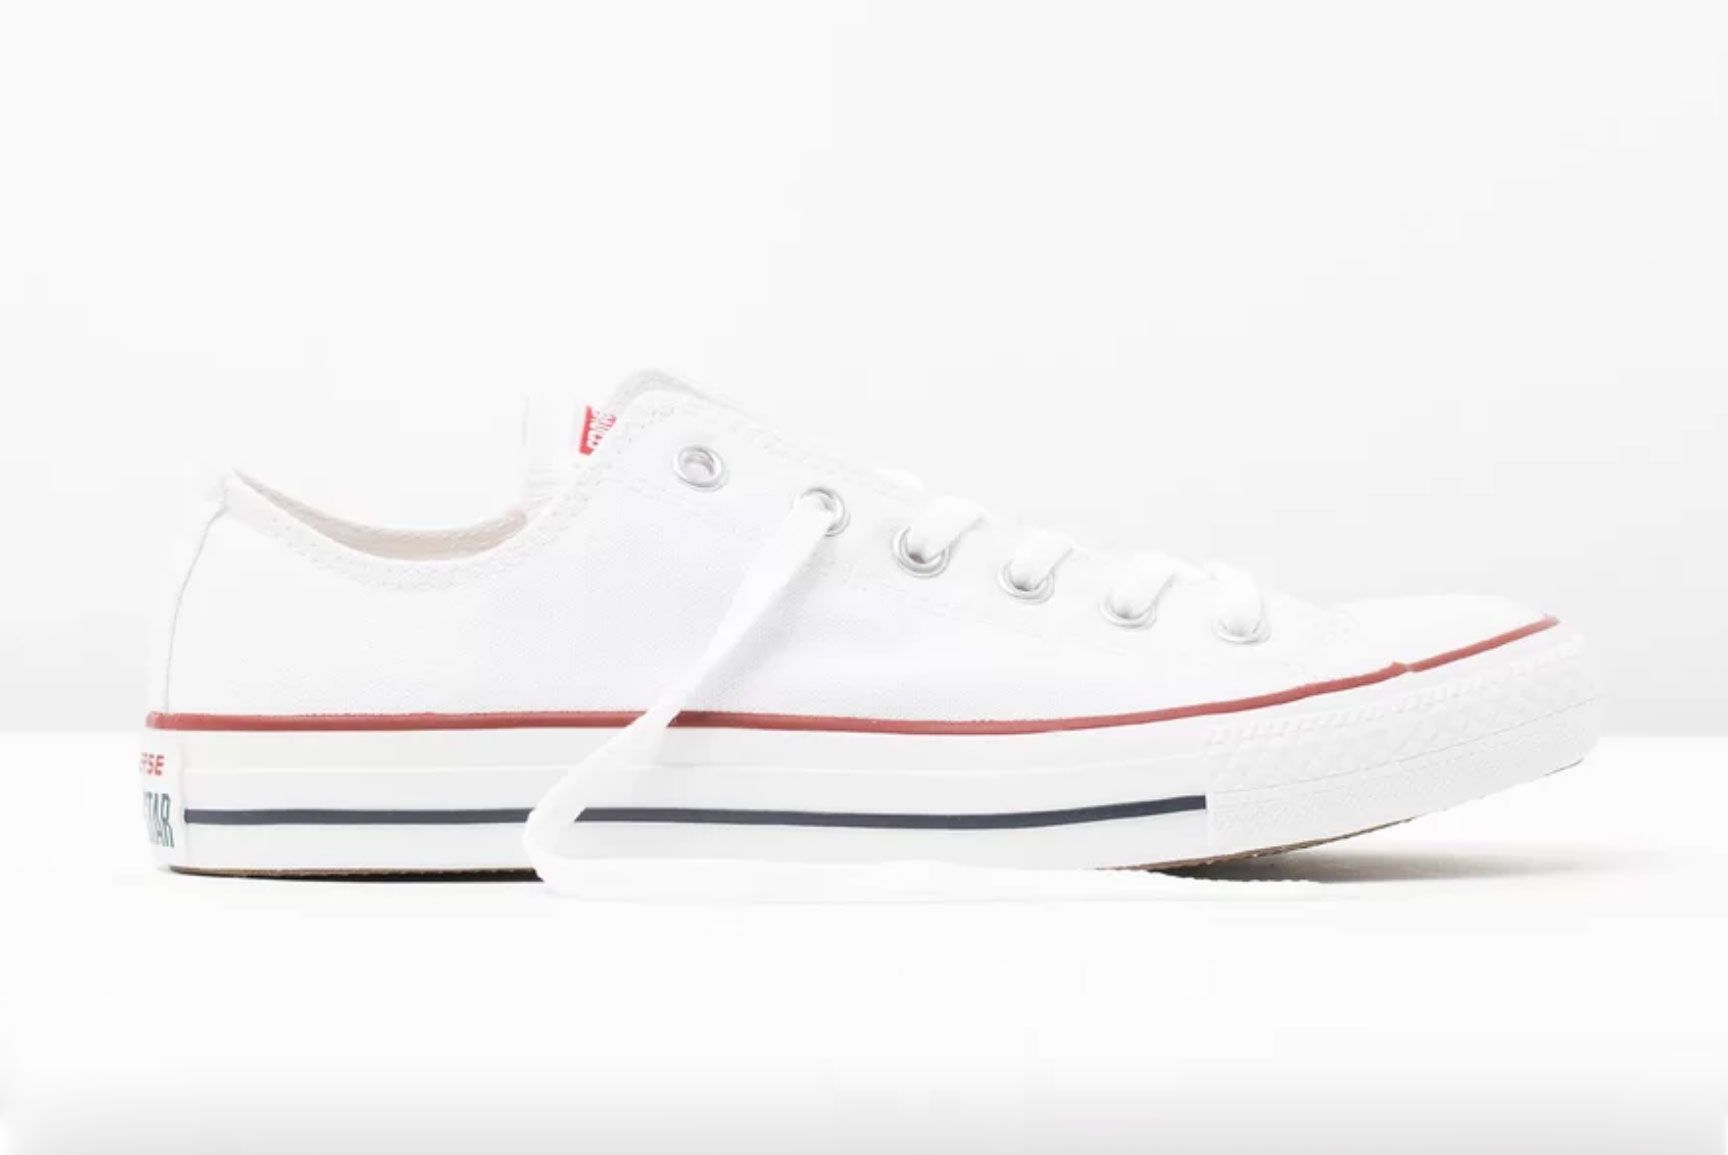 Converse Chuck Taylor All Star Low